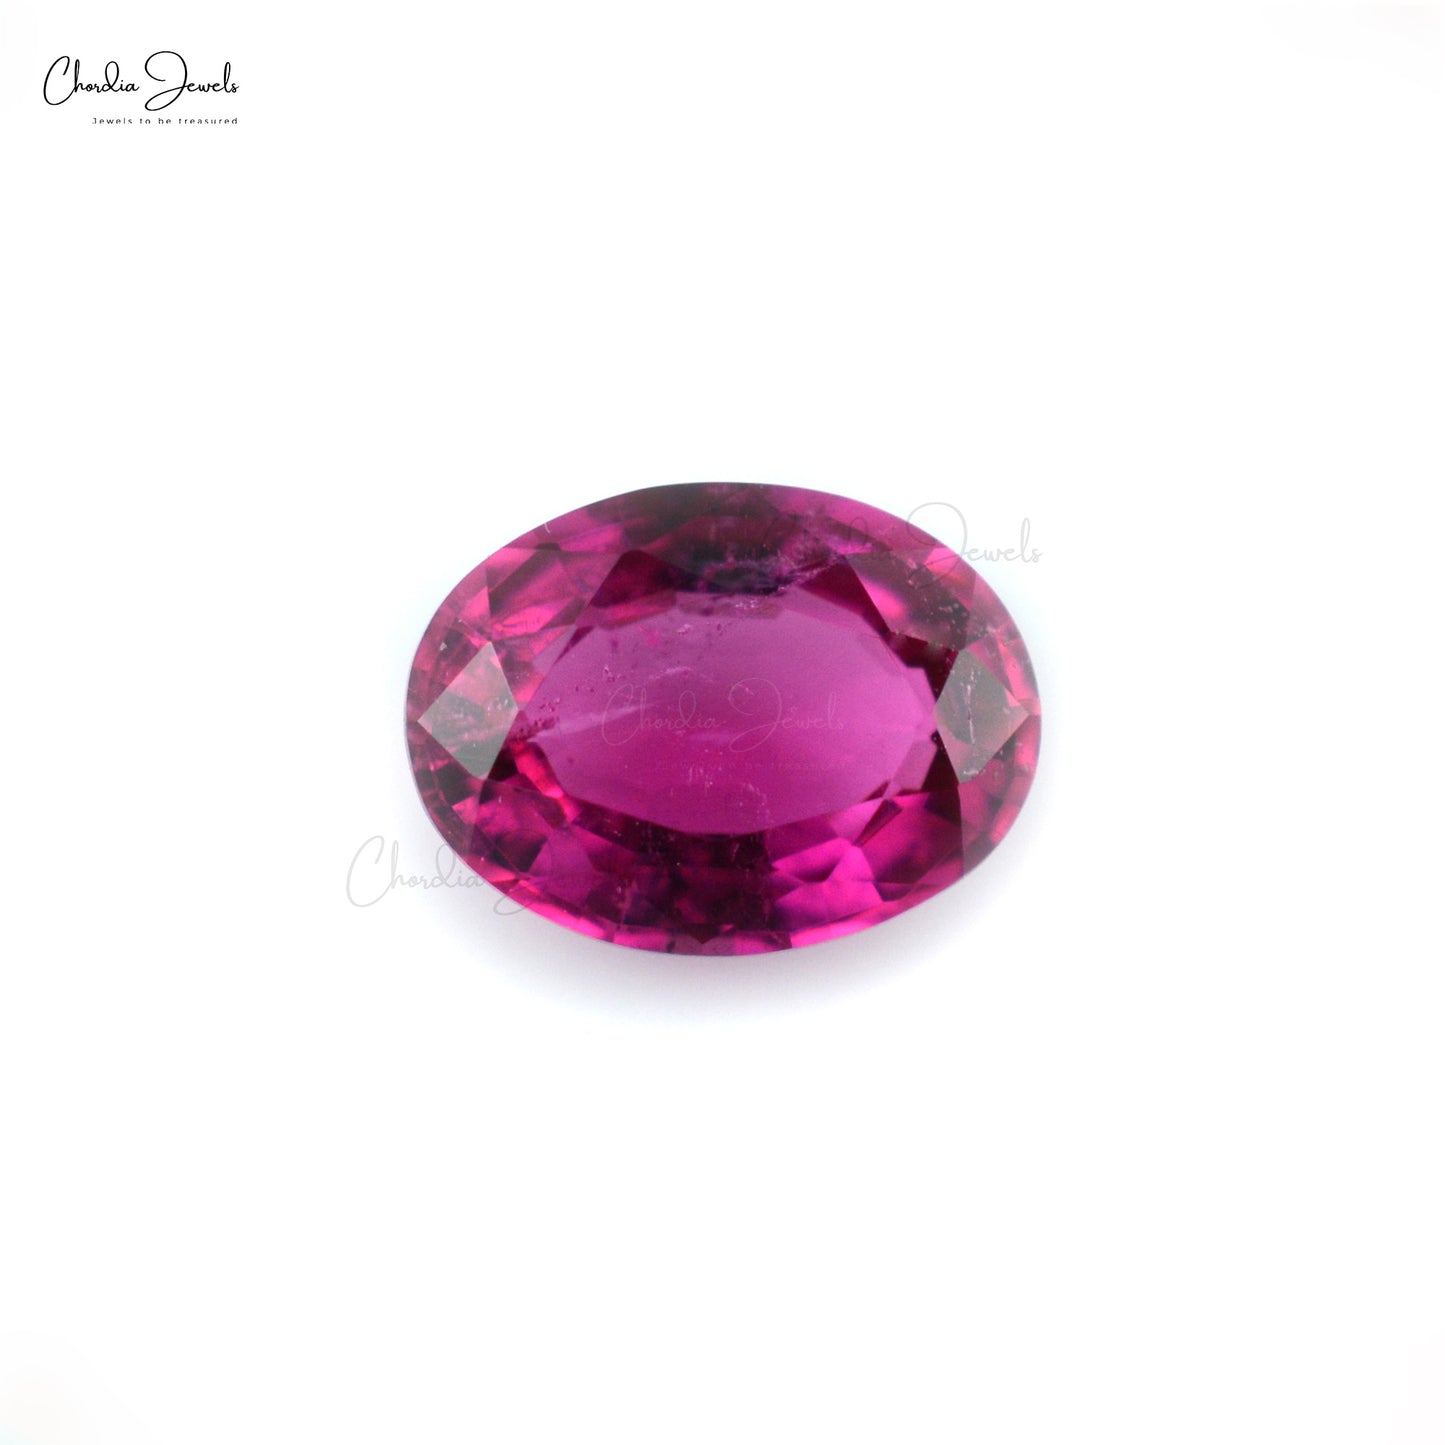 Load image into Gallery viewer, Oval Faceted AAA Rubellite Tourmaline 0.10 Carat Top Grade Gemstone for Earrings, 1 Piece
